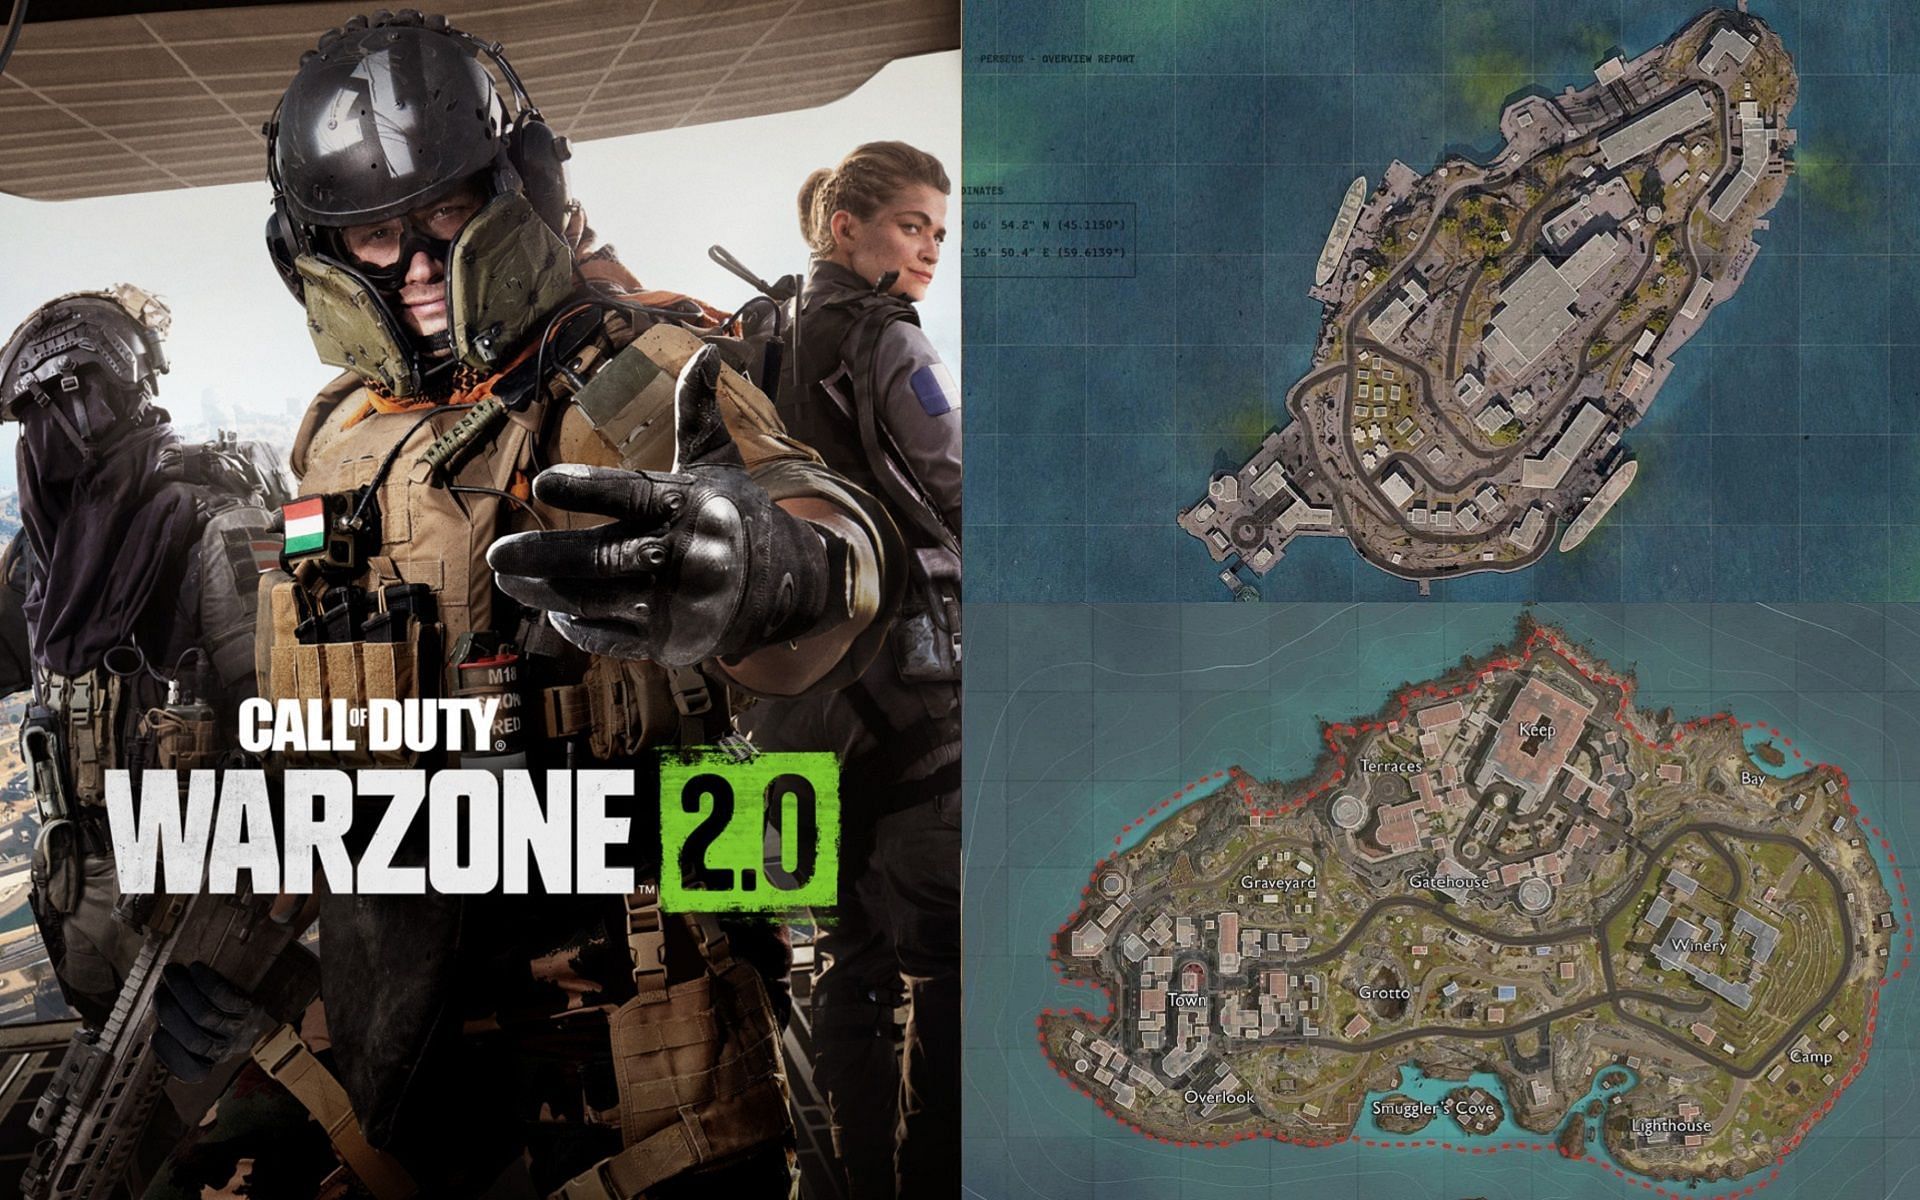 Warzone 2 is rumored to receive Resurgence maps (Images via Activision)